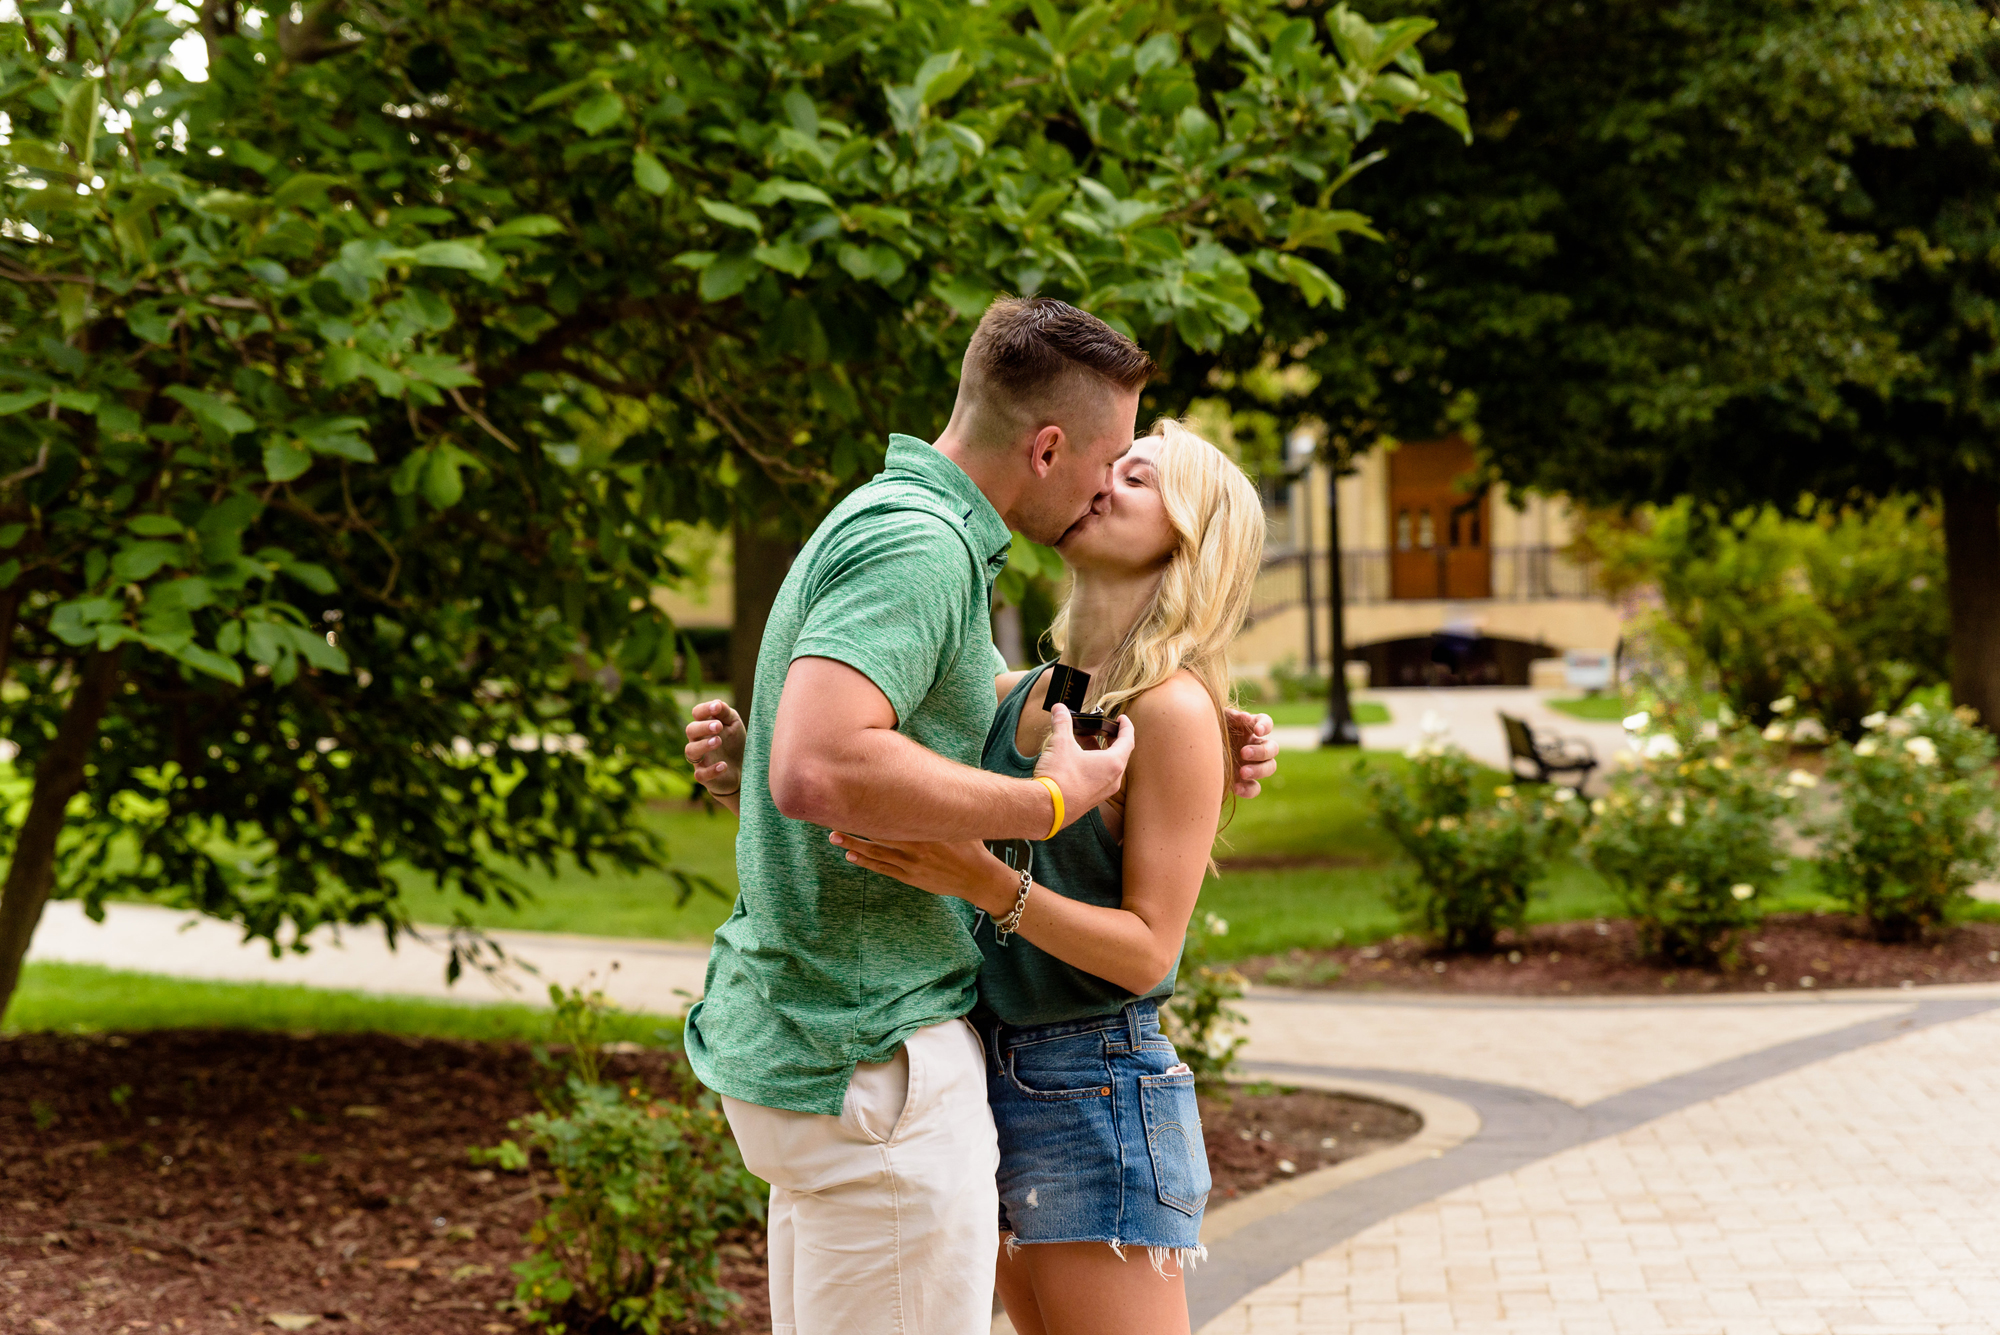 Girlfriend being proposed to in front of the Golden Dome on the campus of University of Notre Dame